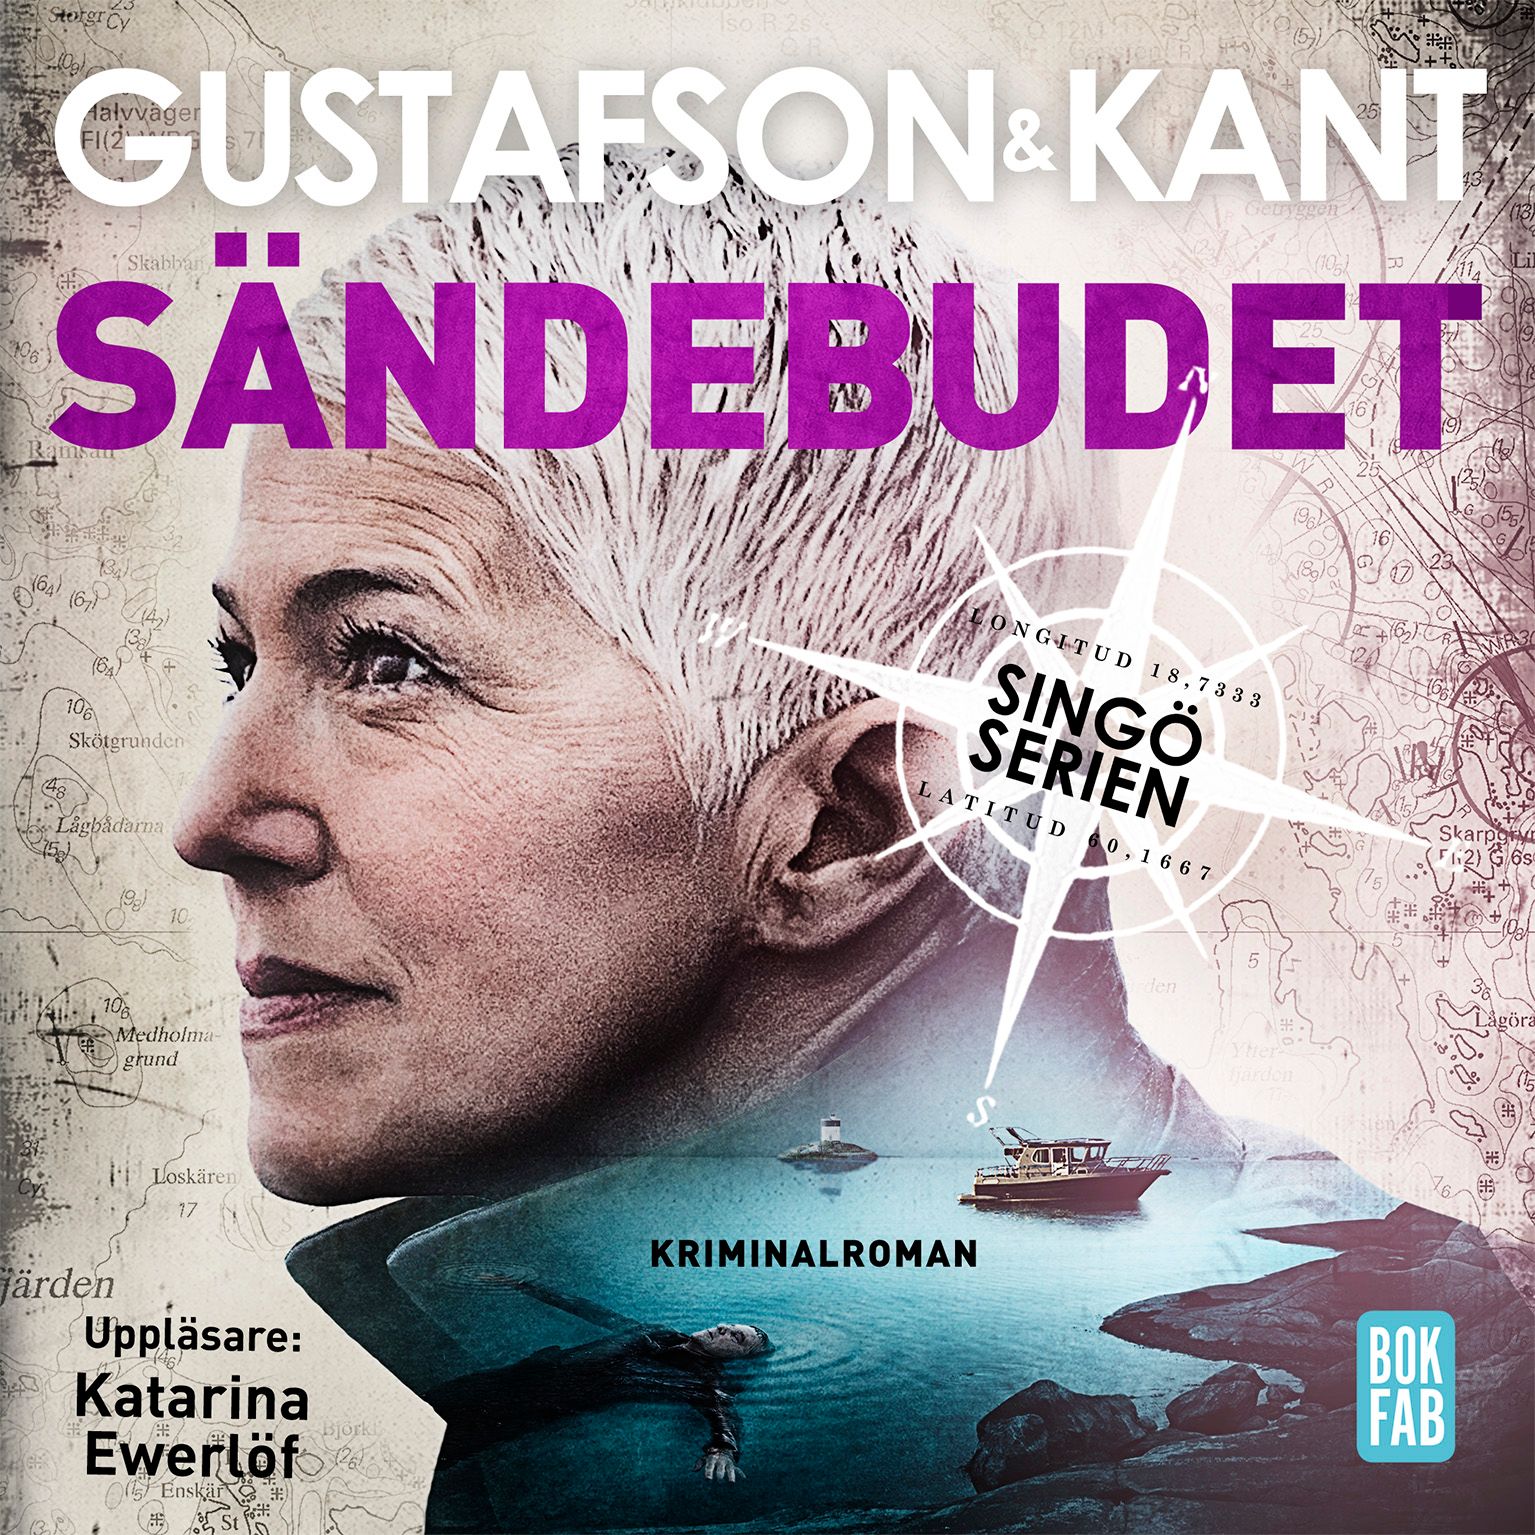 Sändebudet, audiobook by Anders Gustafson, Johan Kant